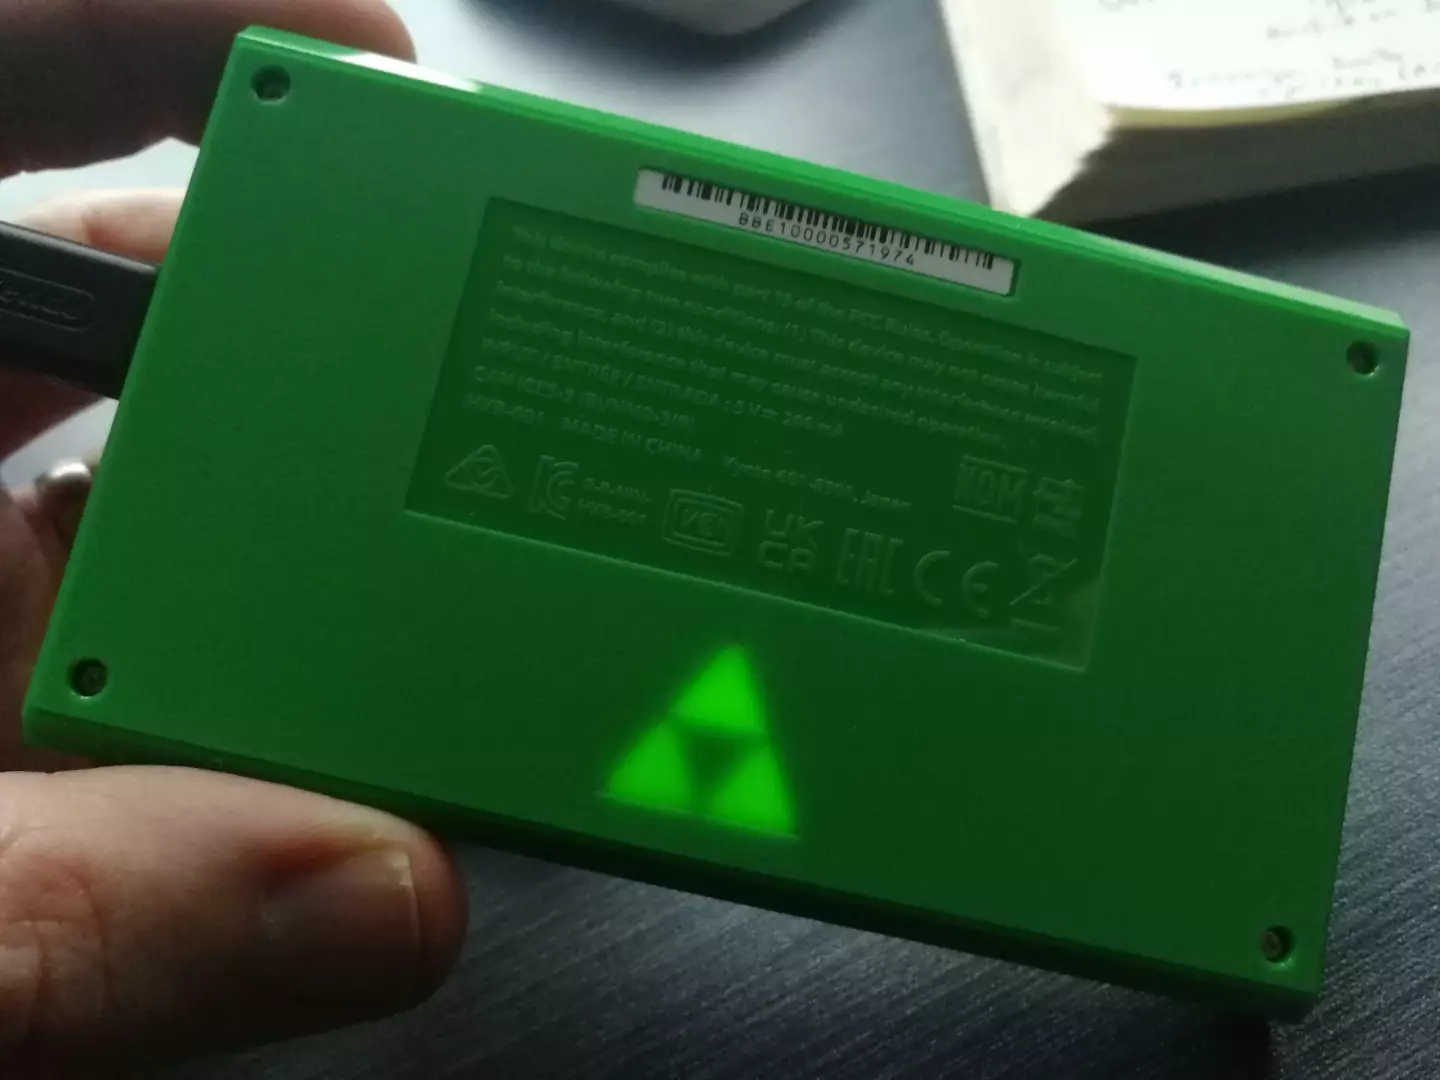 The rear features a glowing Triforce /